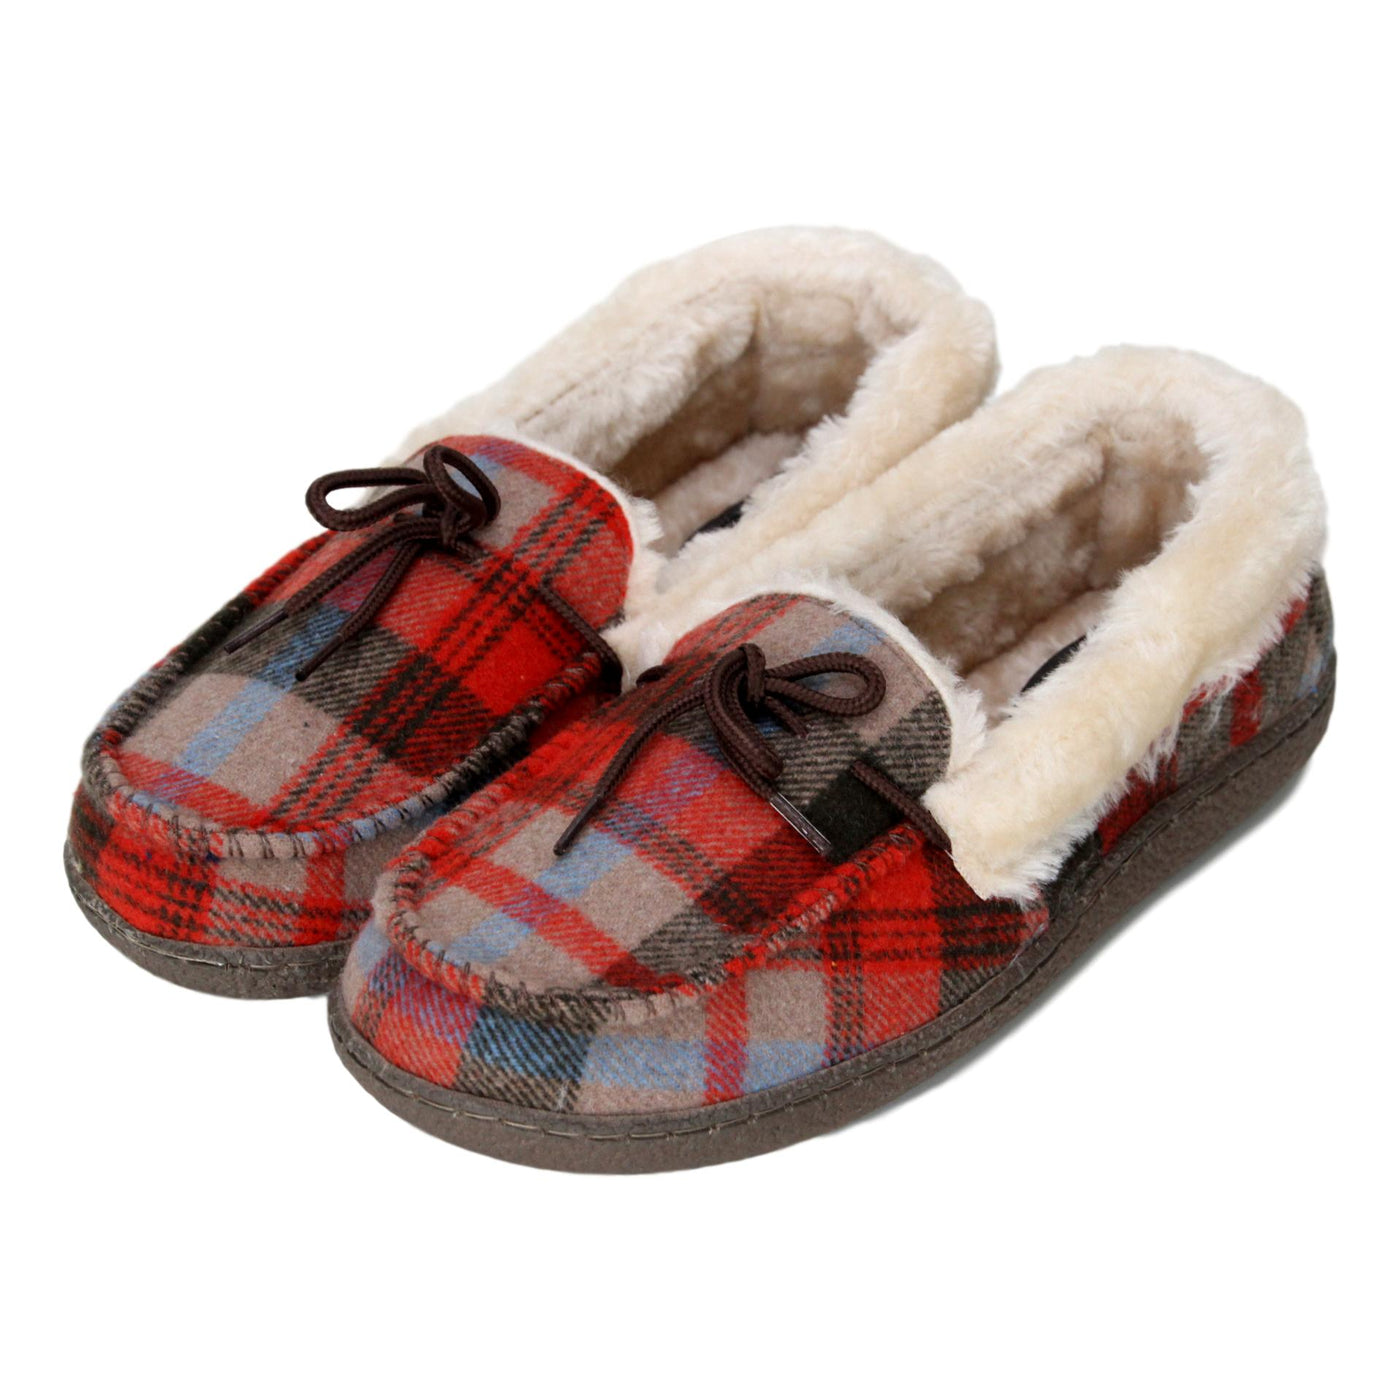 ladies moccasin slippers